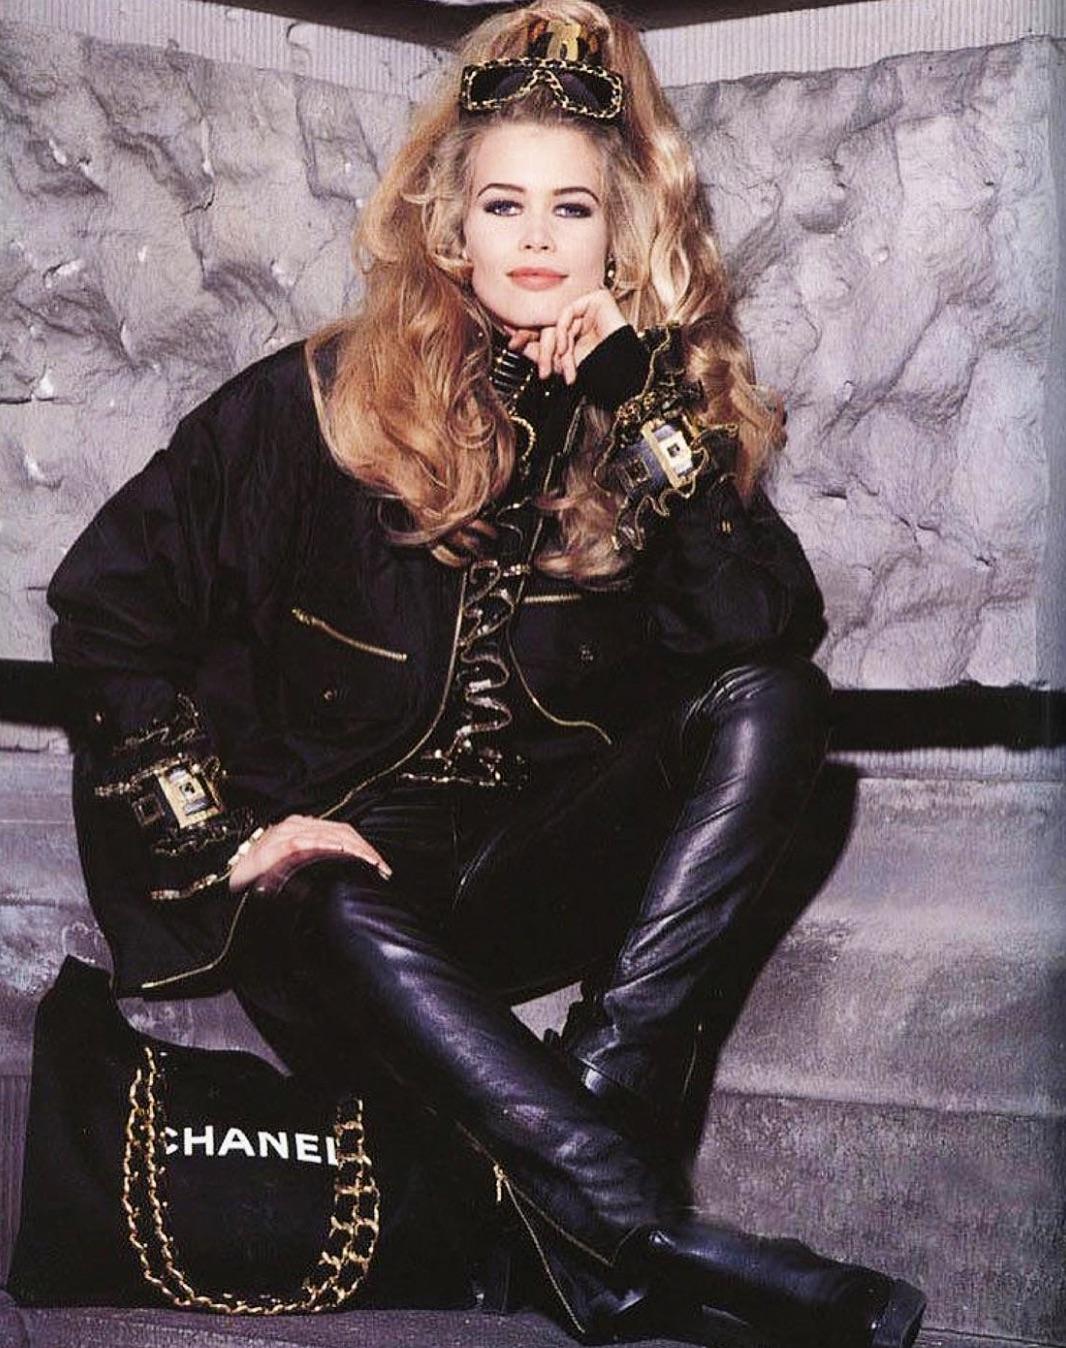 Introducing the iconic leather pants from Chanel's Fall/Winter 1992 